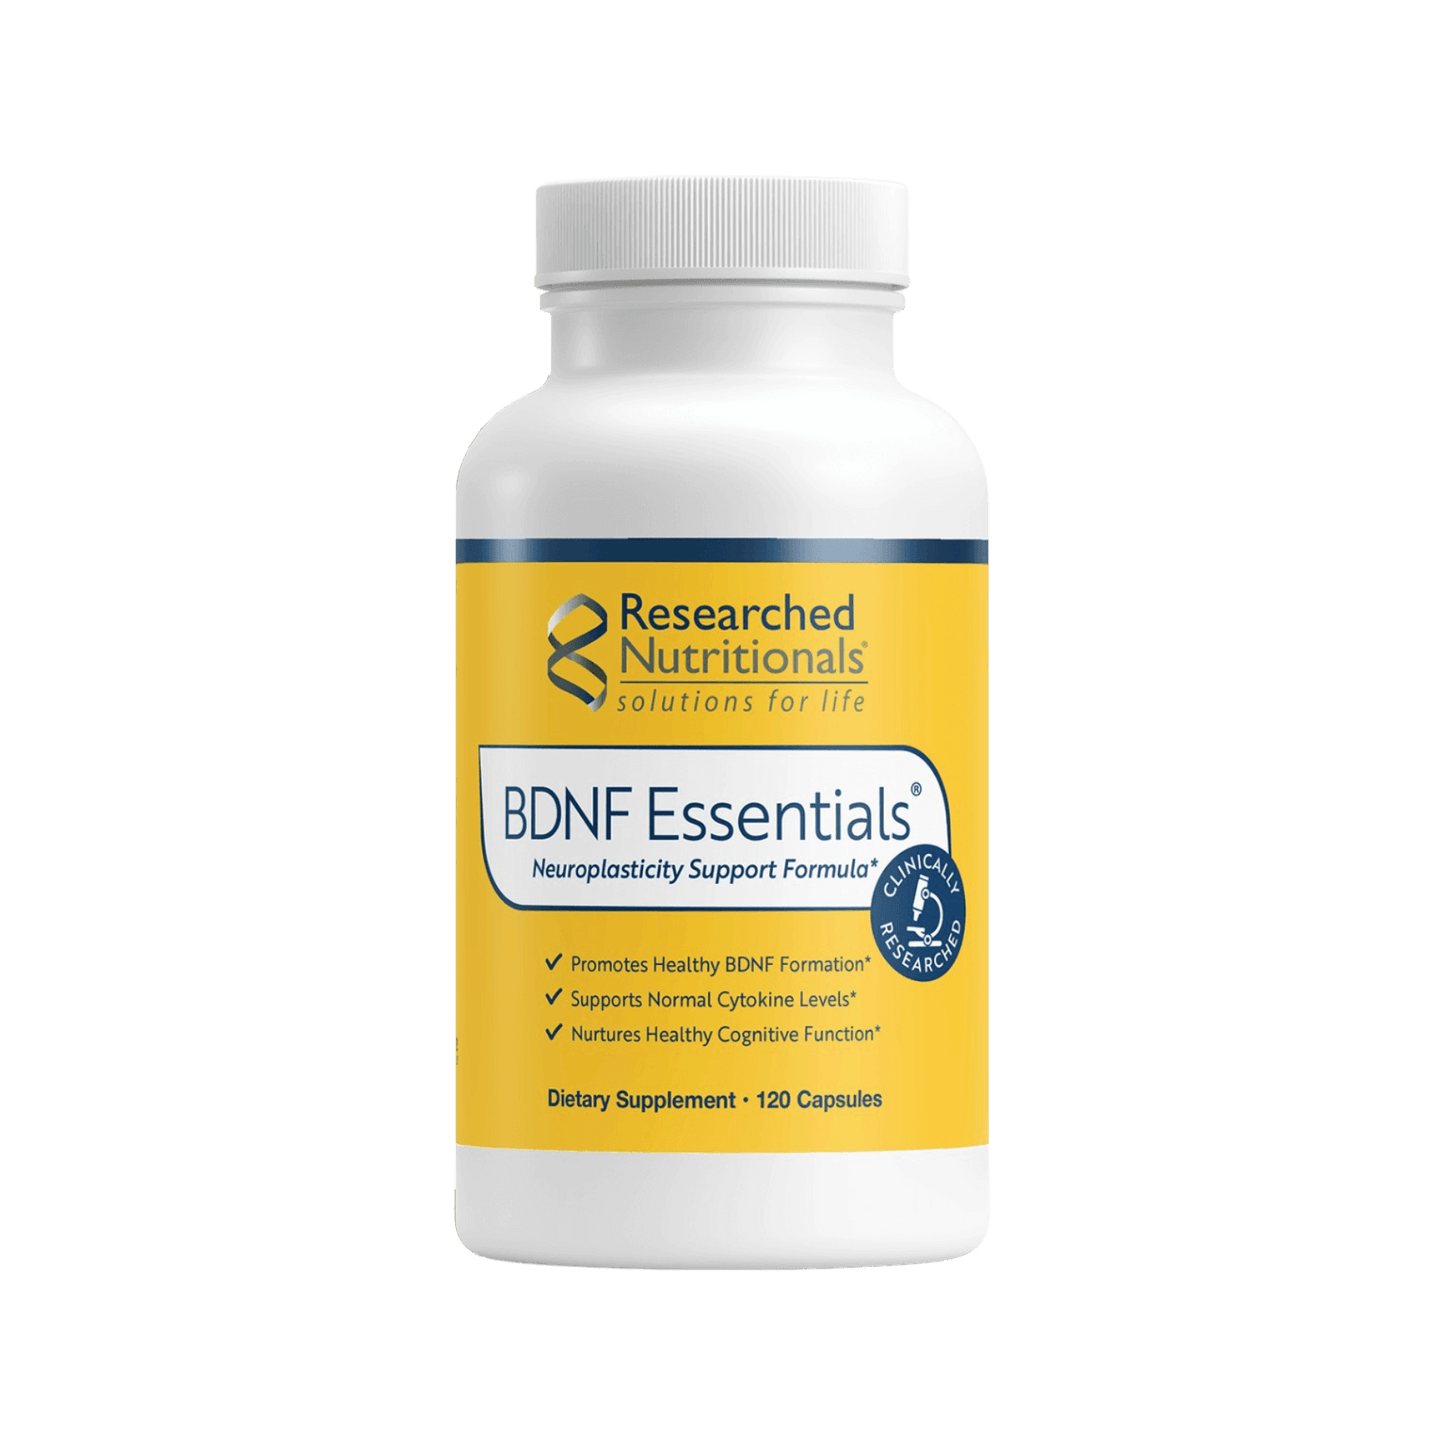 Researched Nutritionals BDNF Essentials Capsules